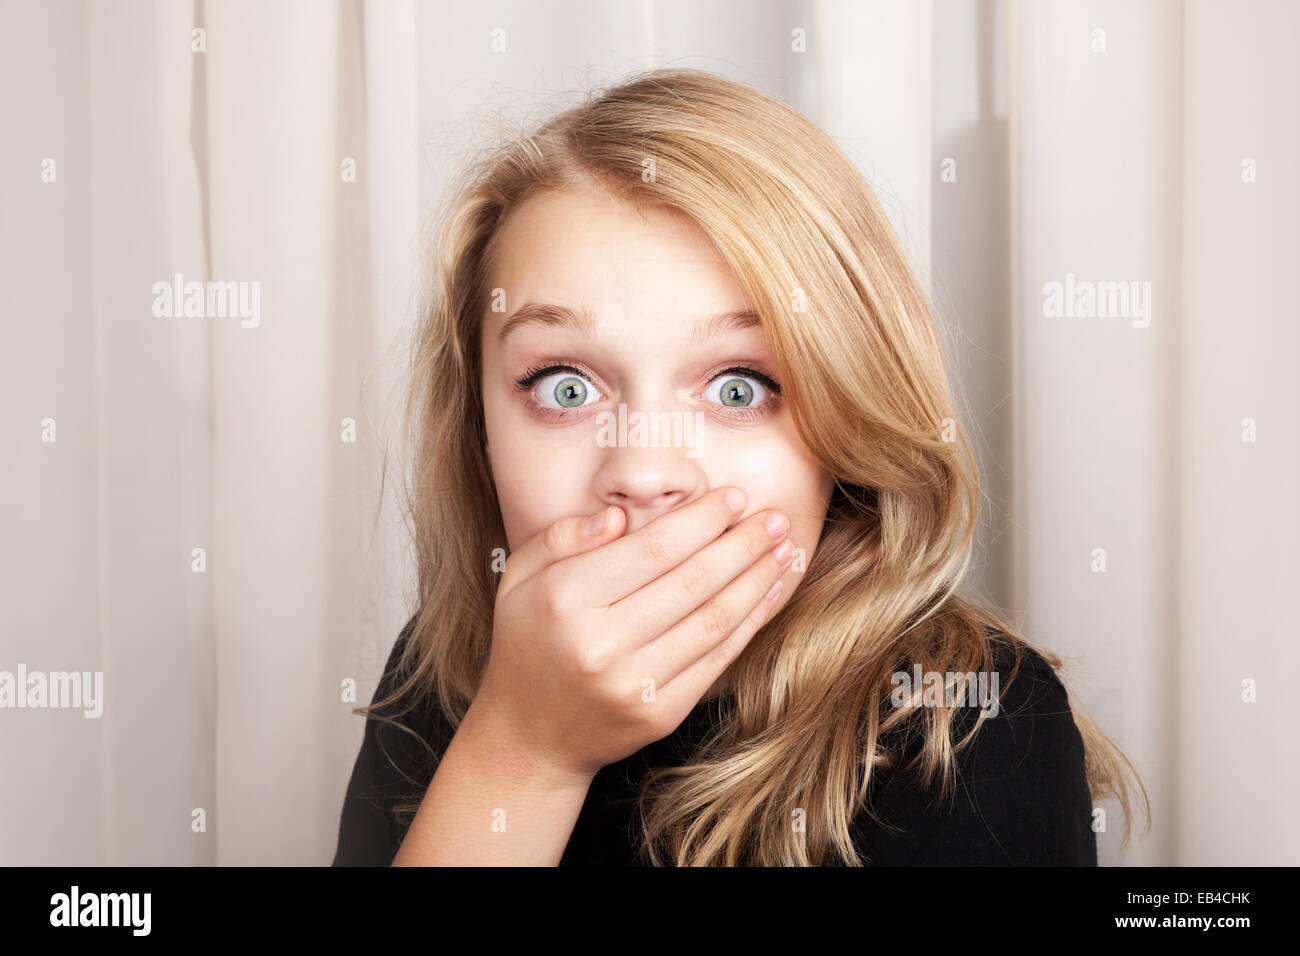 Beautiful blond Caucasian surprised girl opened her eyes wide and covers her mouth with her hands, closeup studio portrait Stock Photo